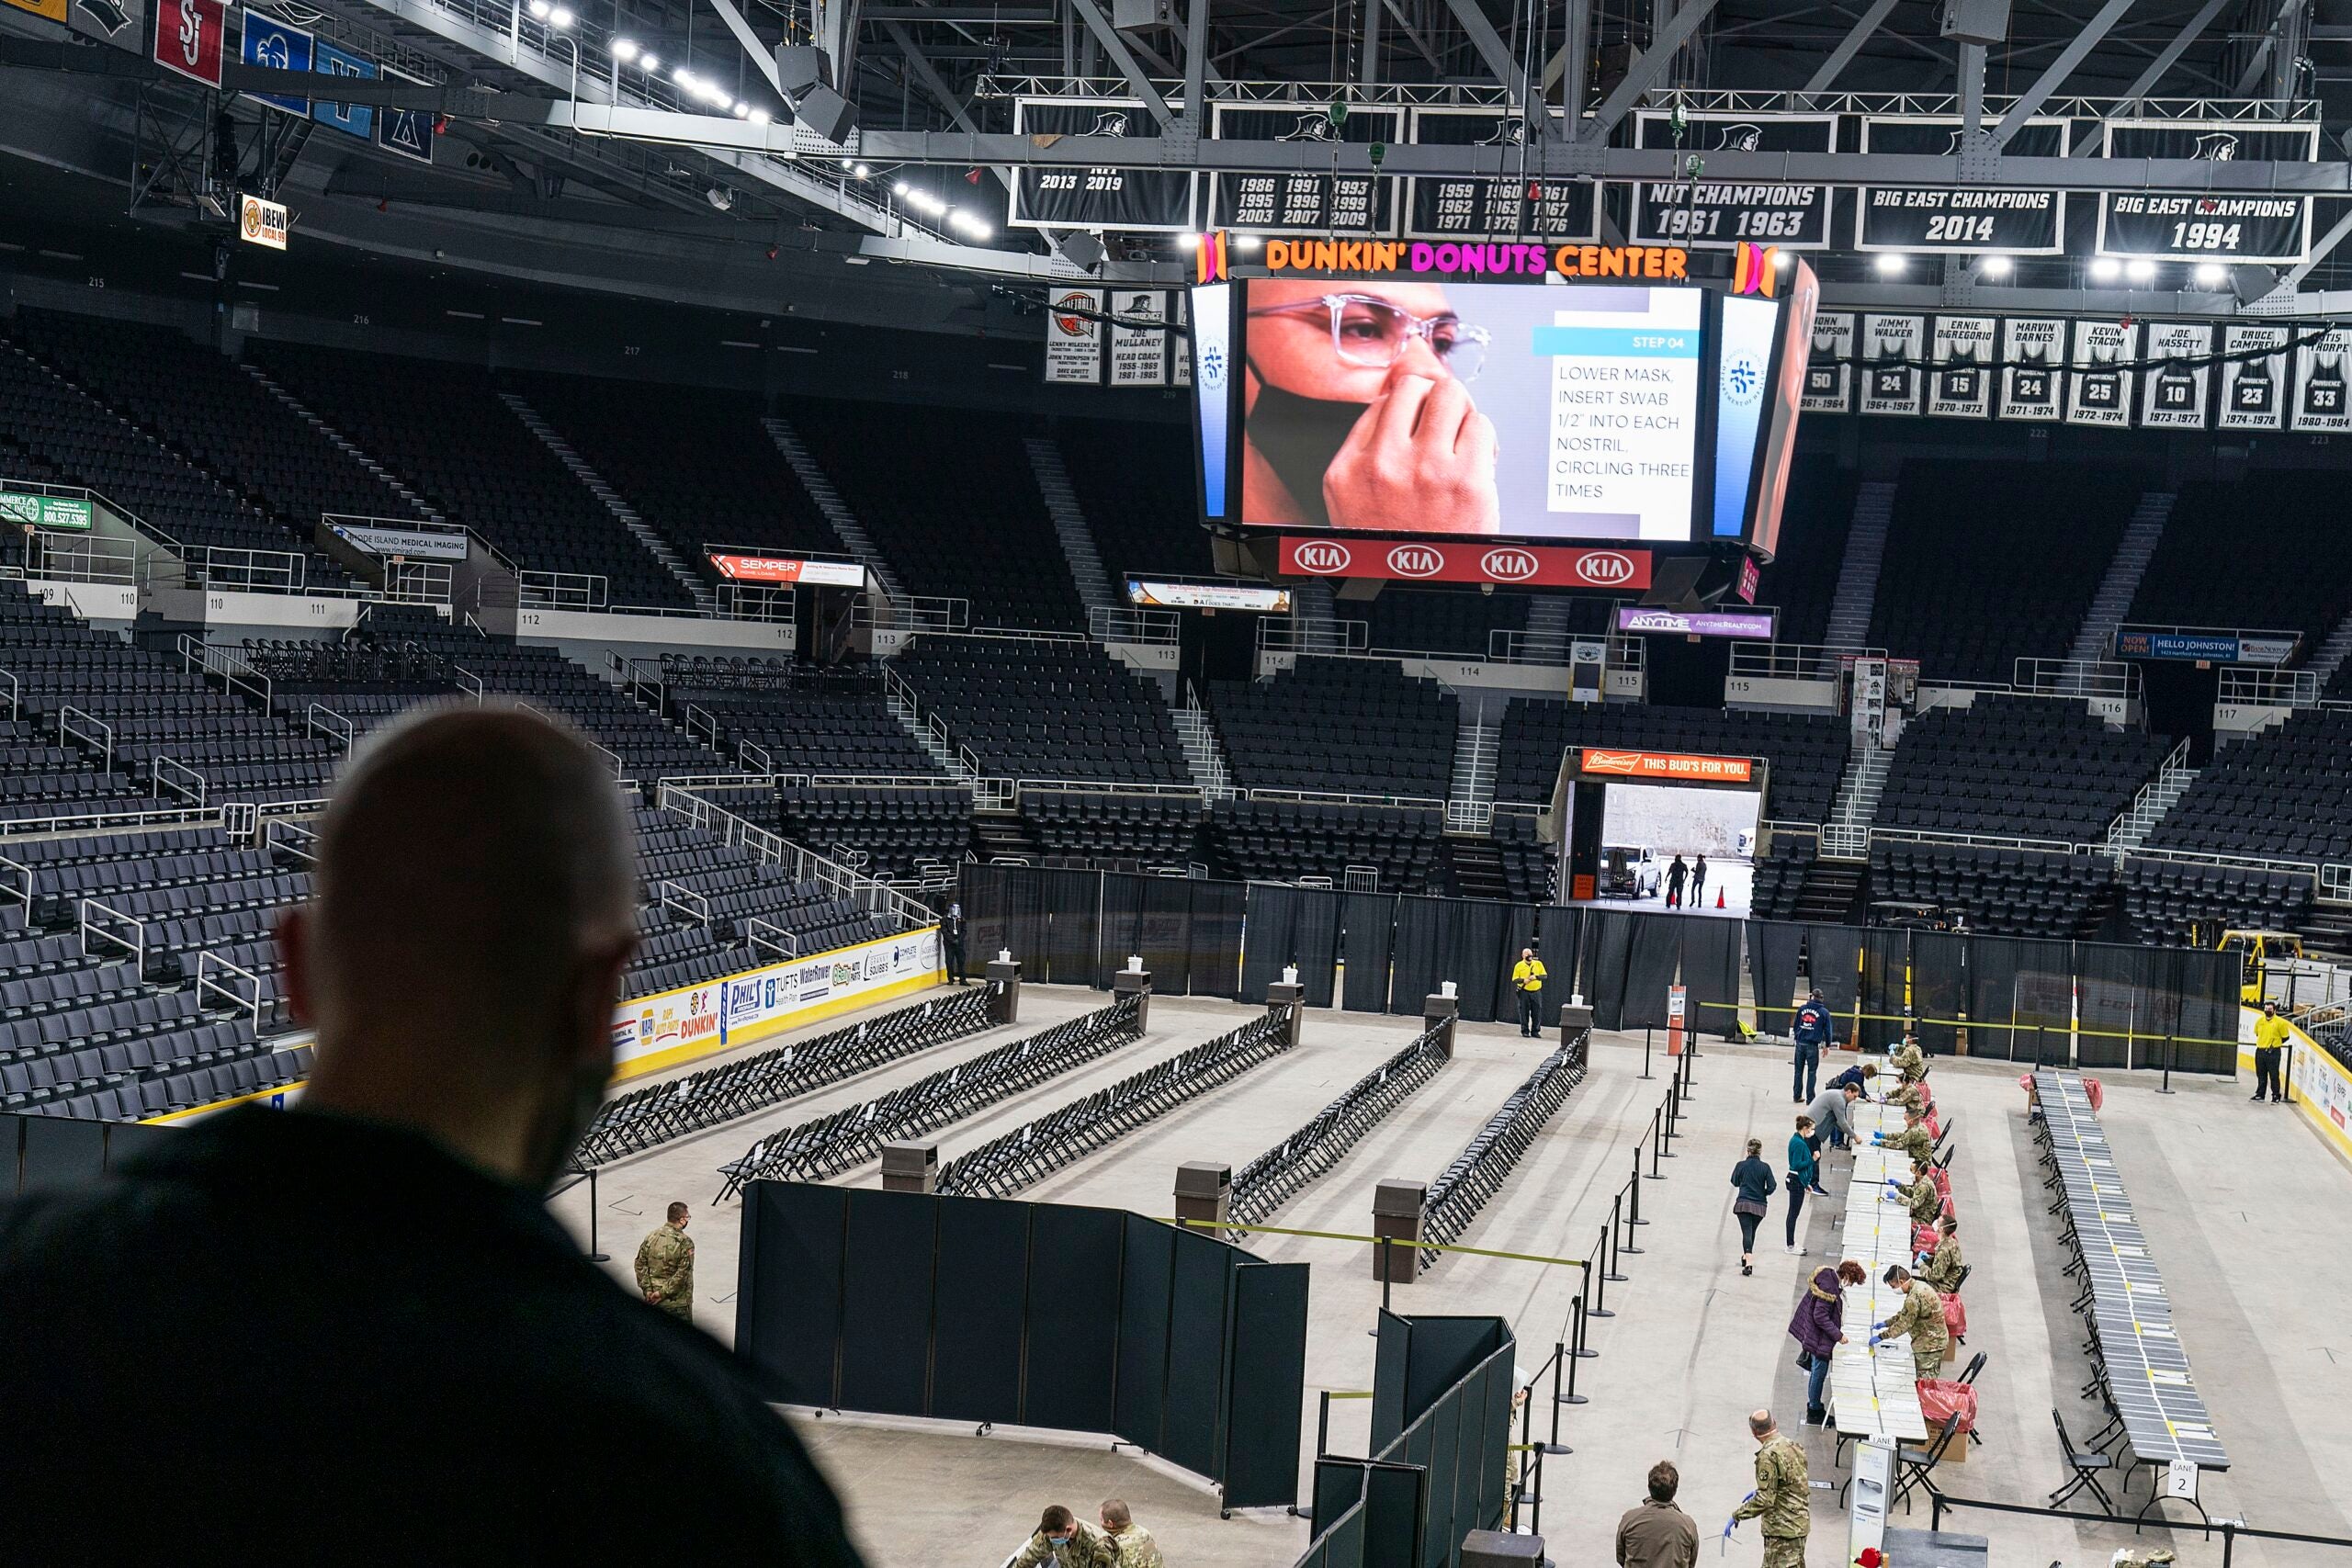 Dunkin' Donuts Center - All You Need to Know BEFORE You Go (with Photos)